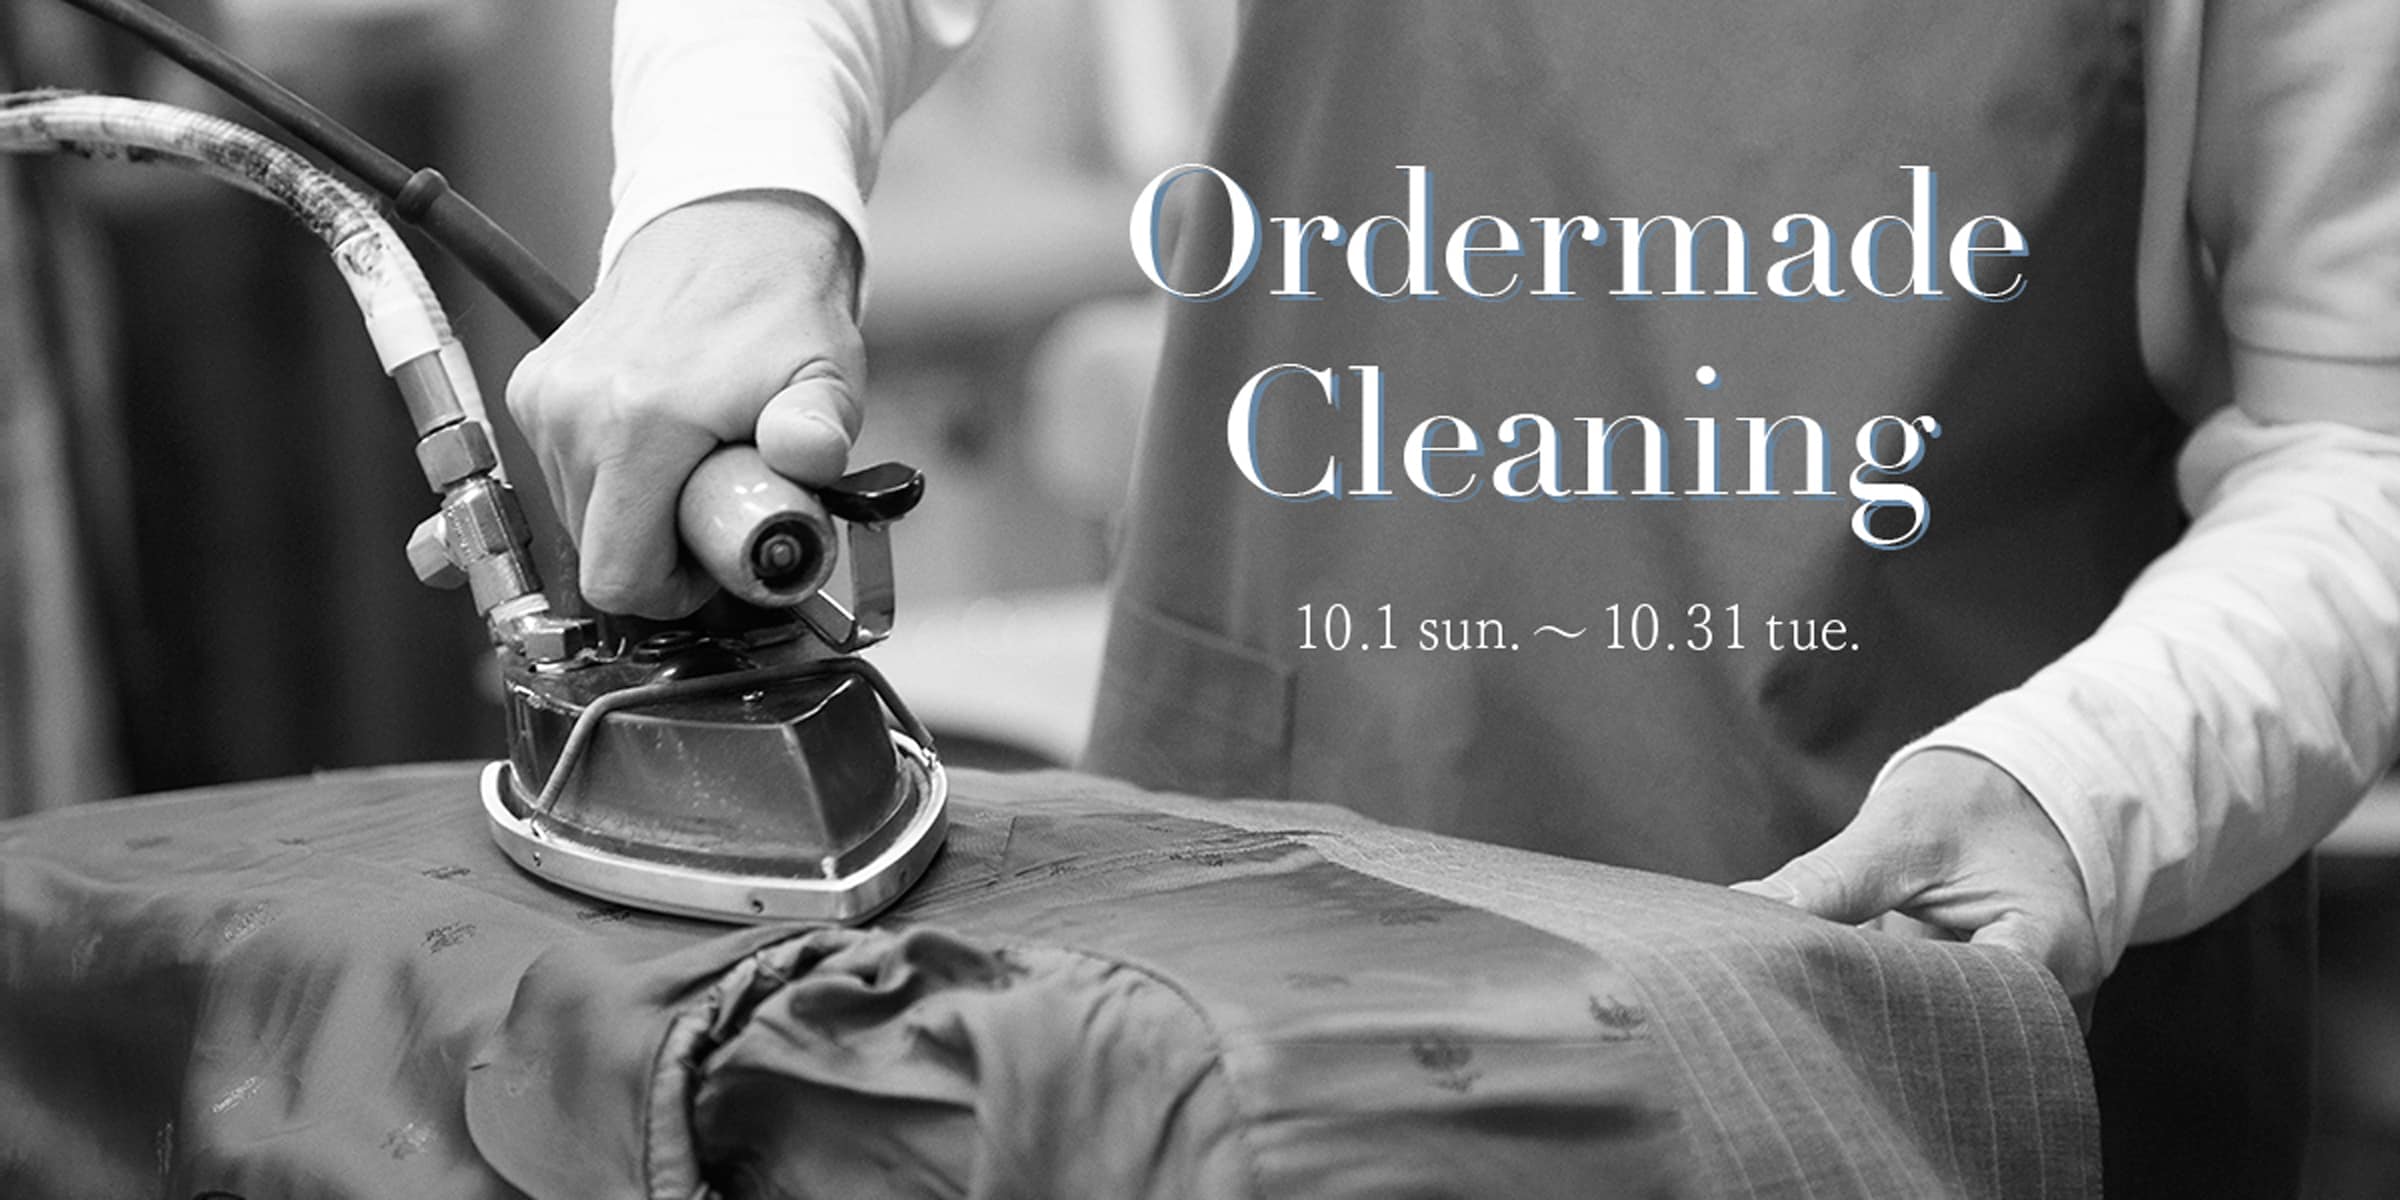 Ordermade Cleaning